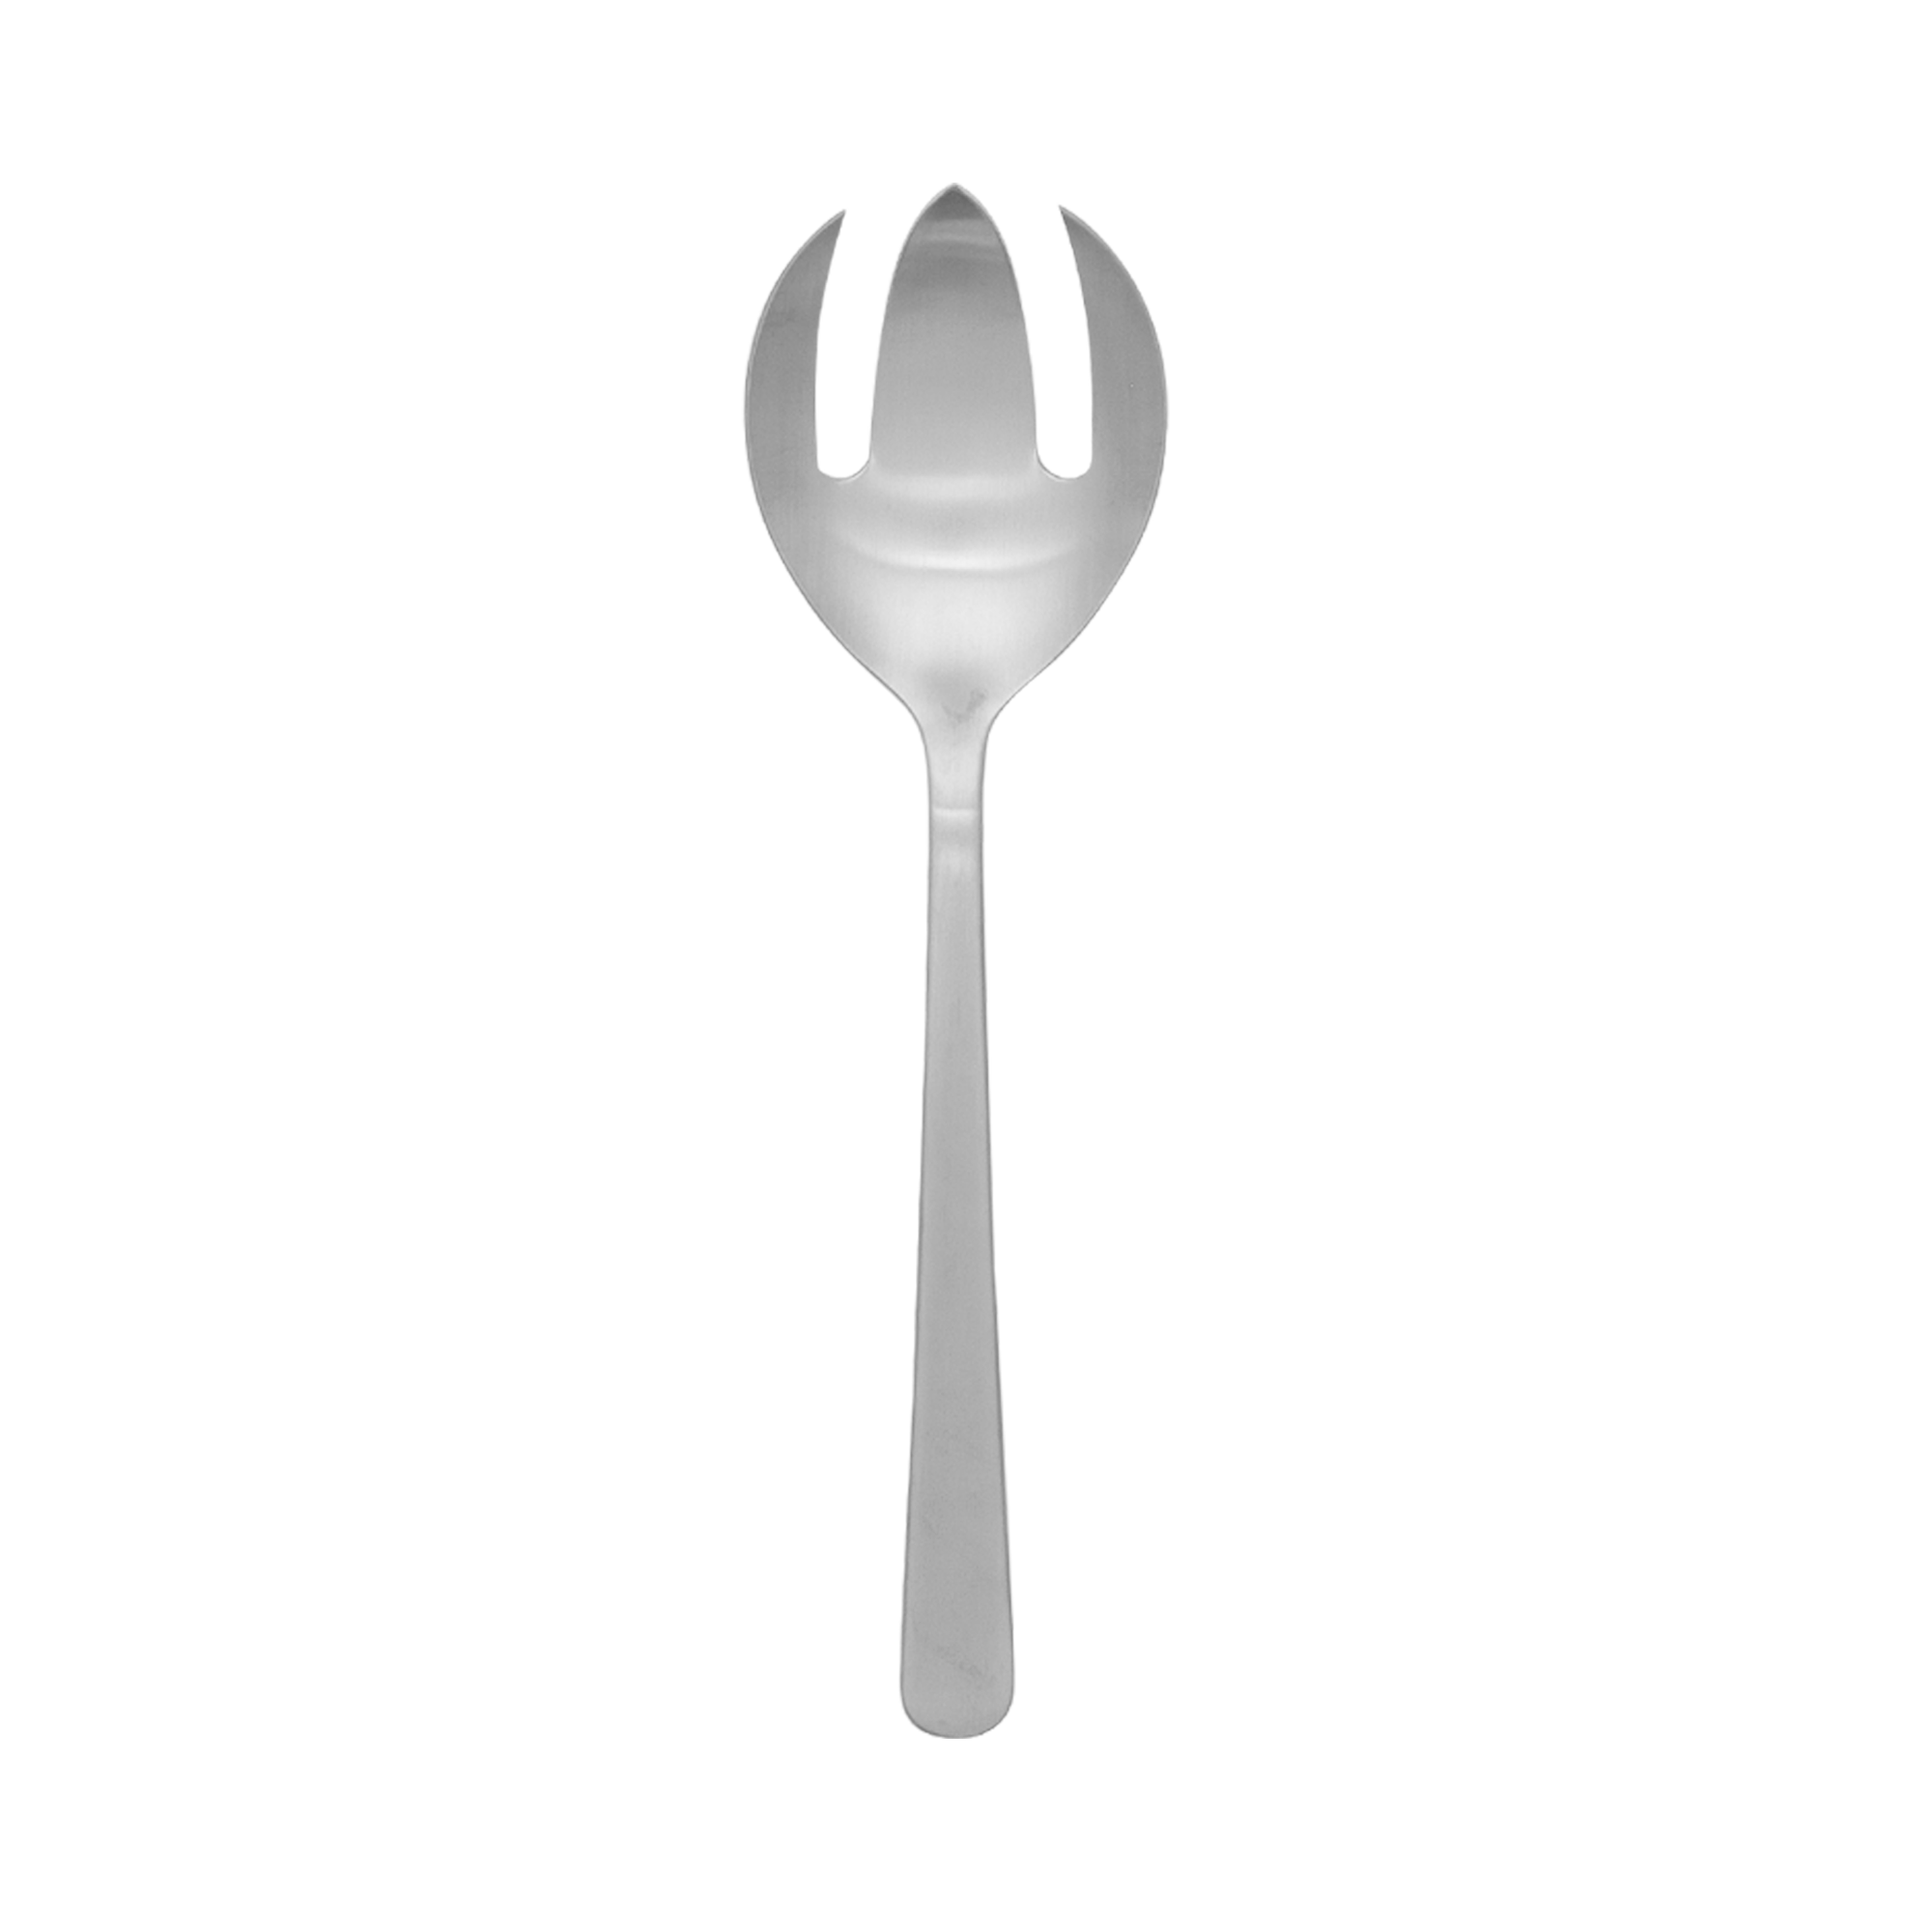 Serving fork small